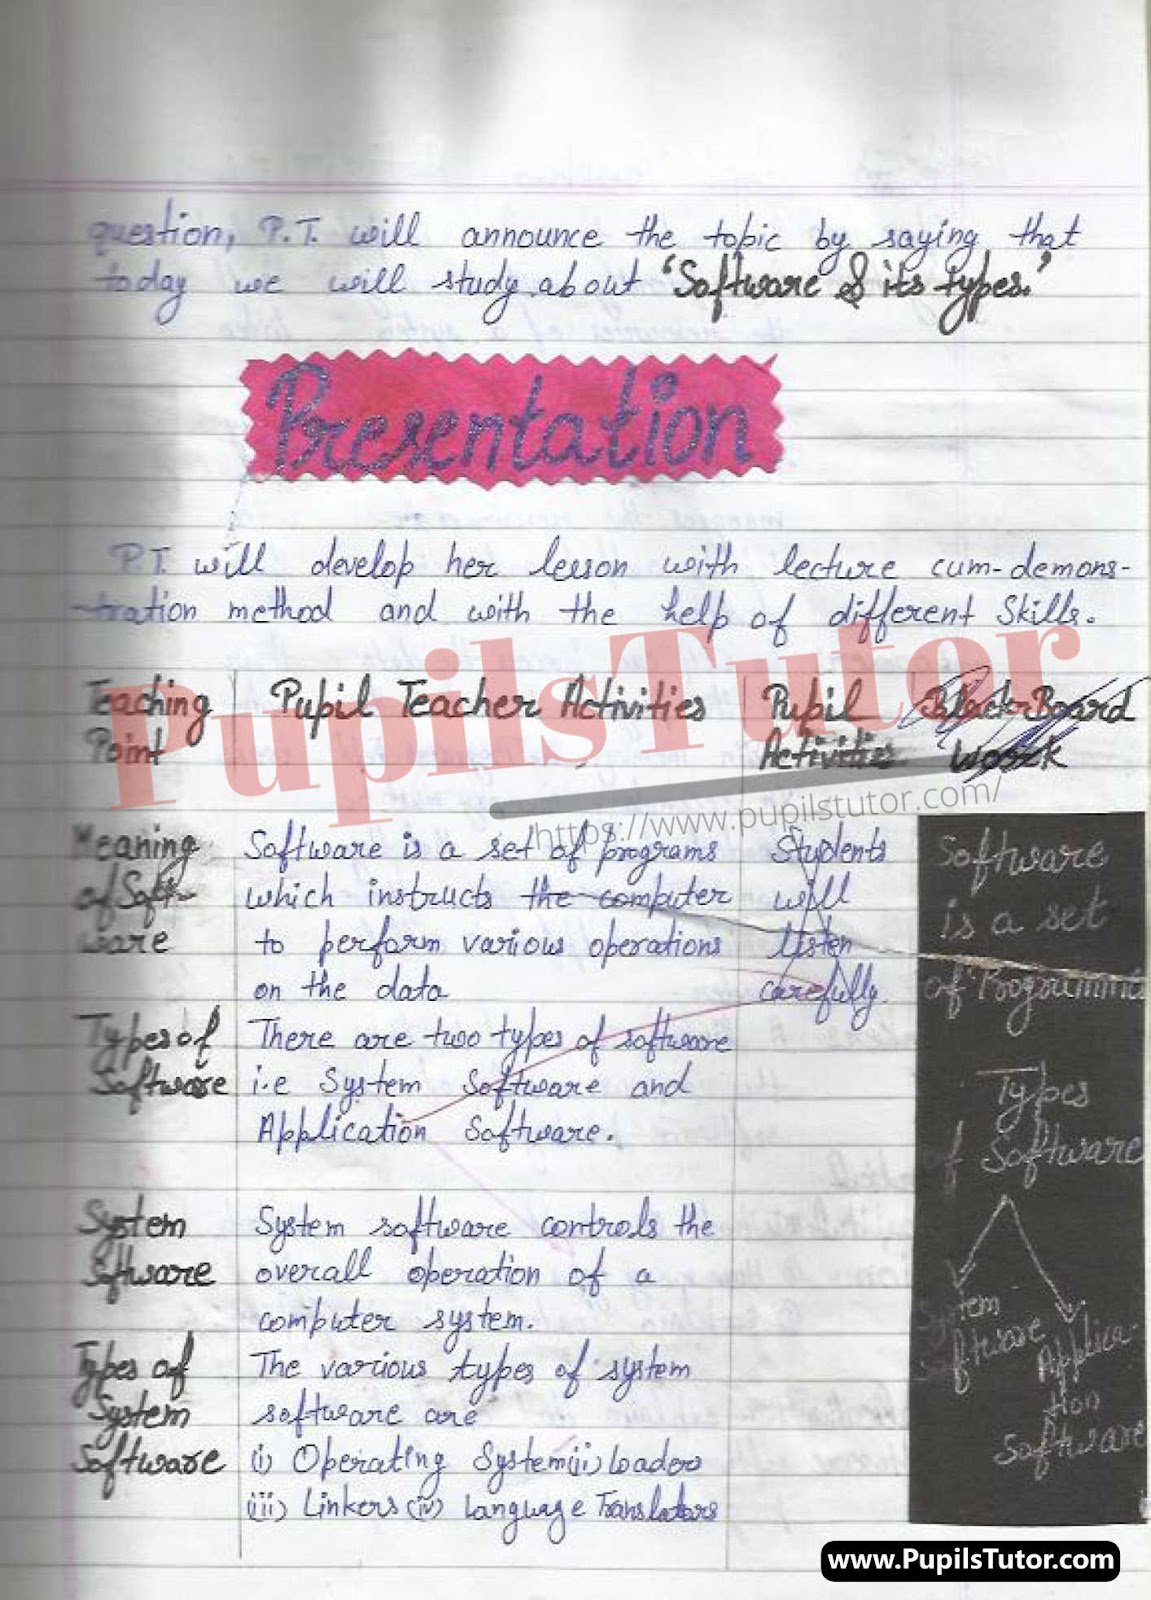 Class/Grade 9 Computer Lesson Plan On System And Application Software For CBSE NCERT KVS School And University College Teachers – (Page And Image Number 3) – www.pupilstutor.com